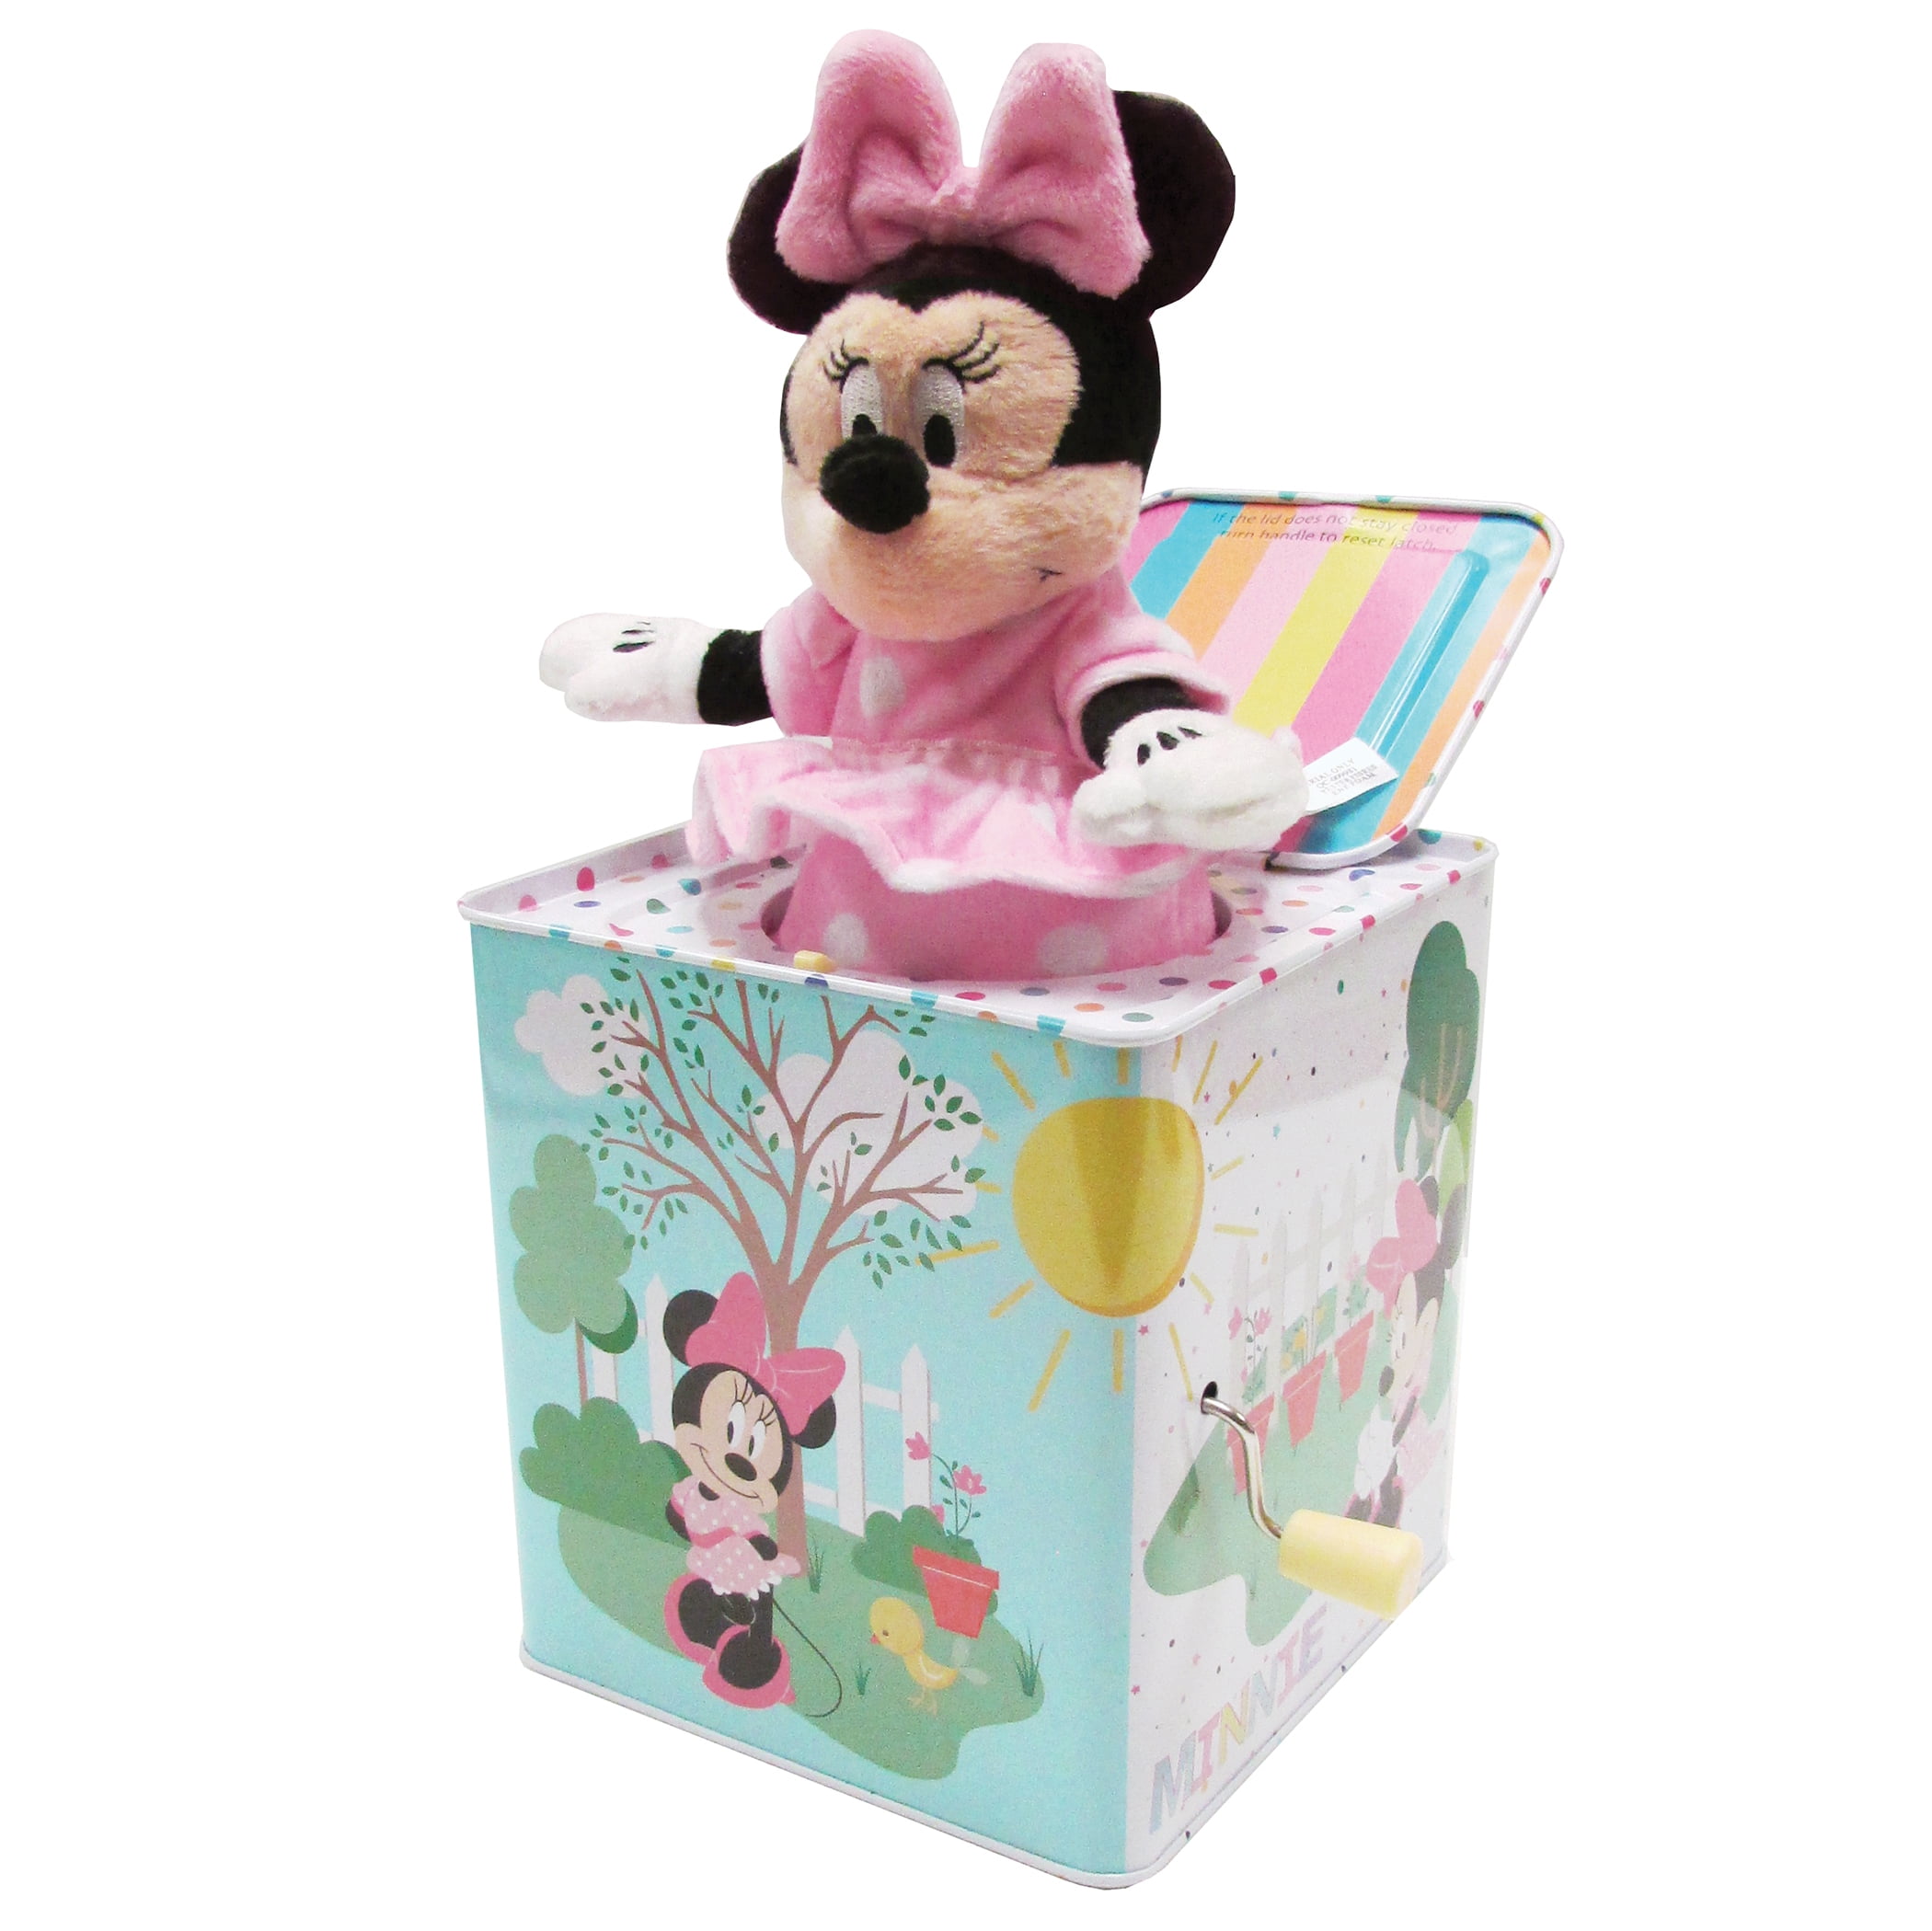 Minnie Mouse Jack-in-the-Box - Walmart.com